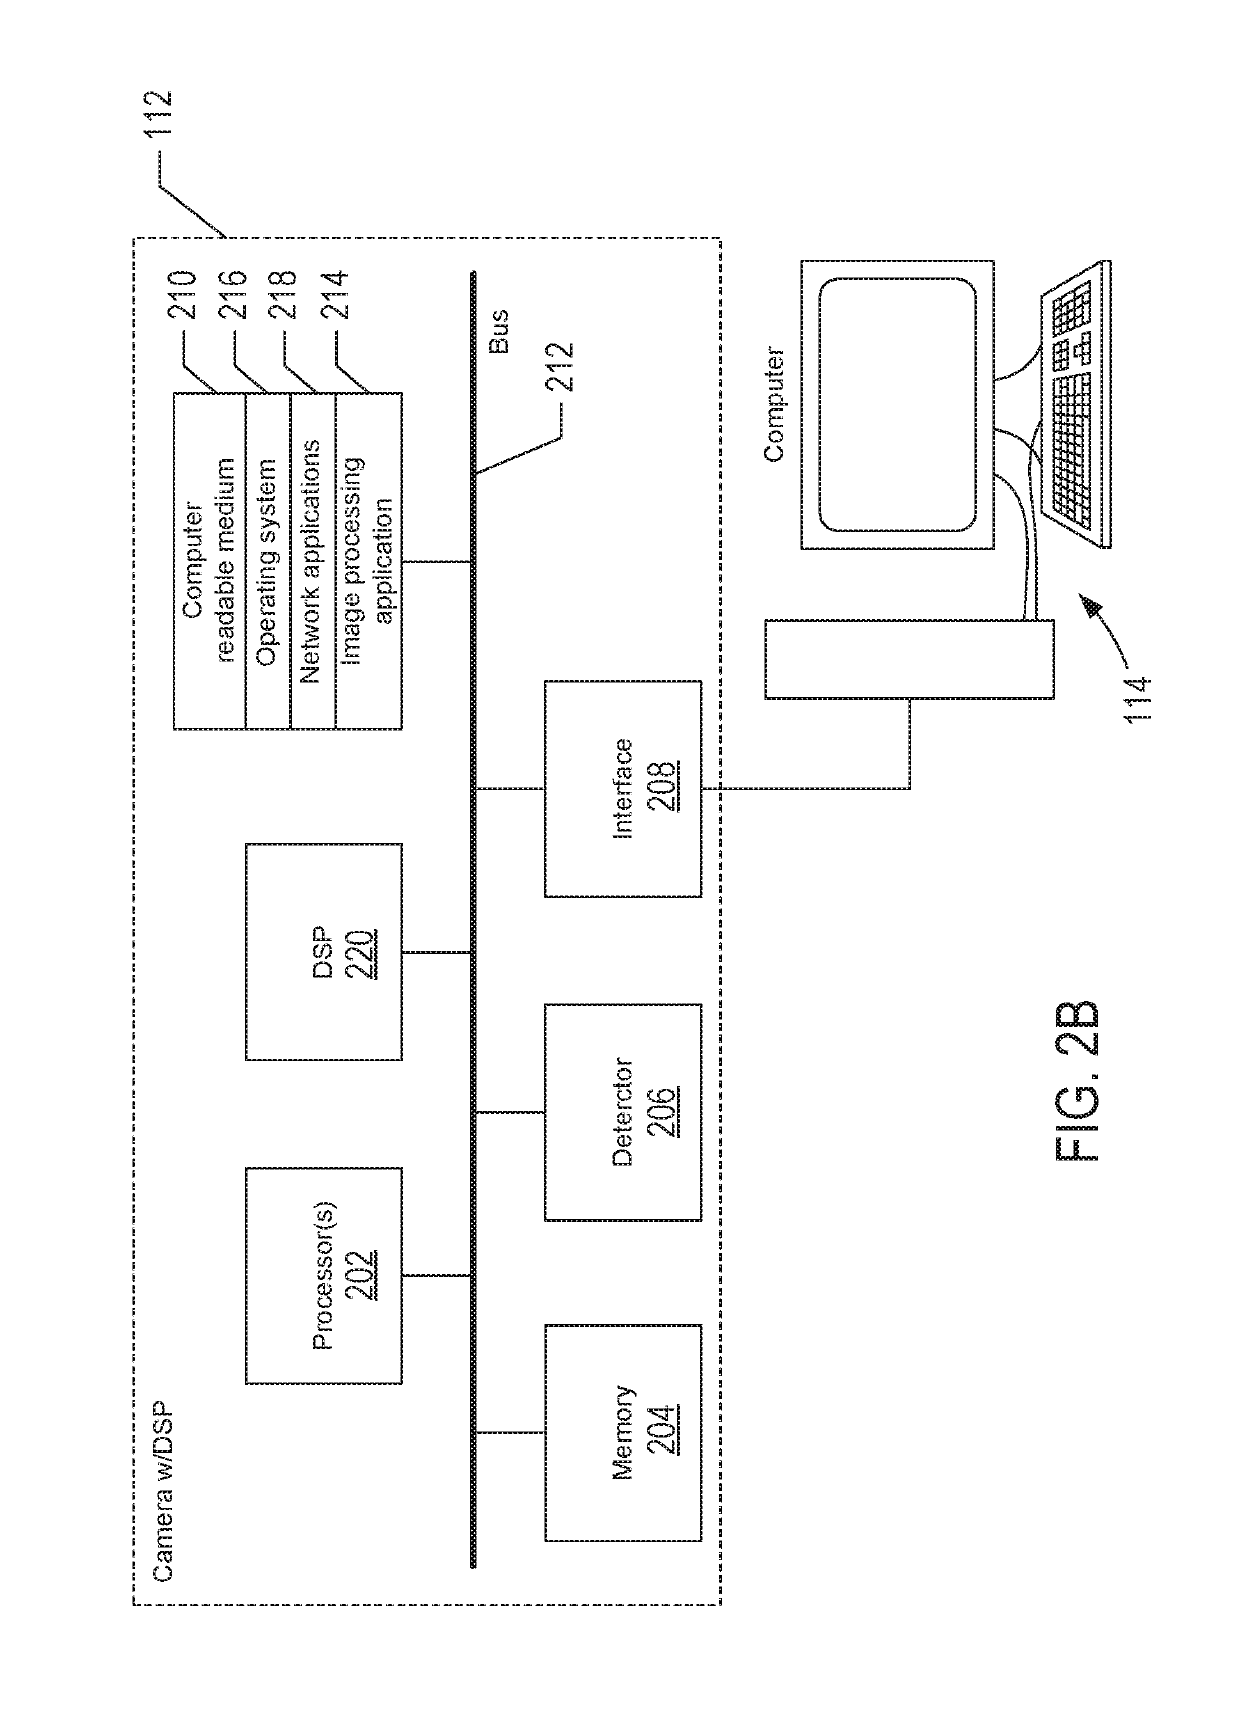 Systems and methods for camera-based image processing in microscopy instruments